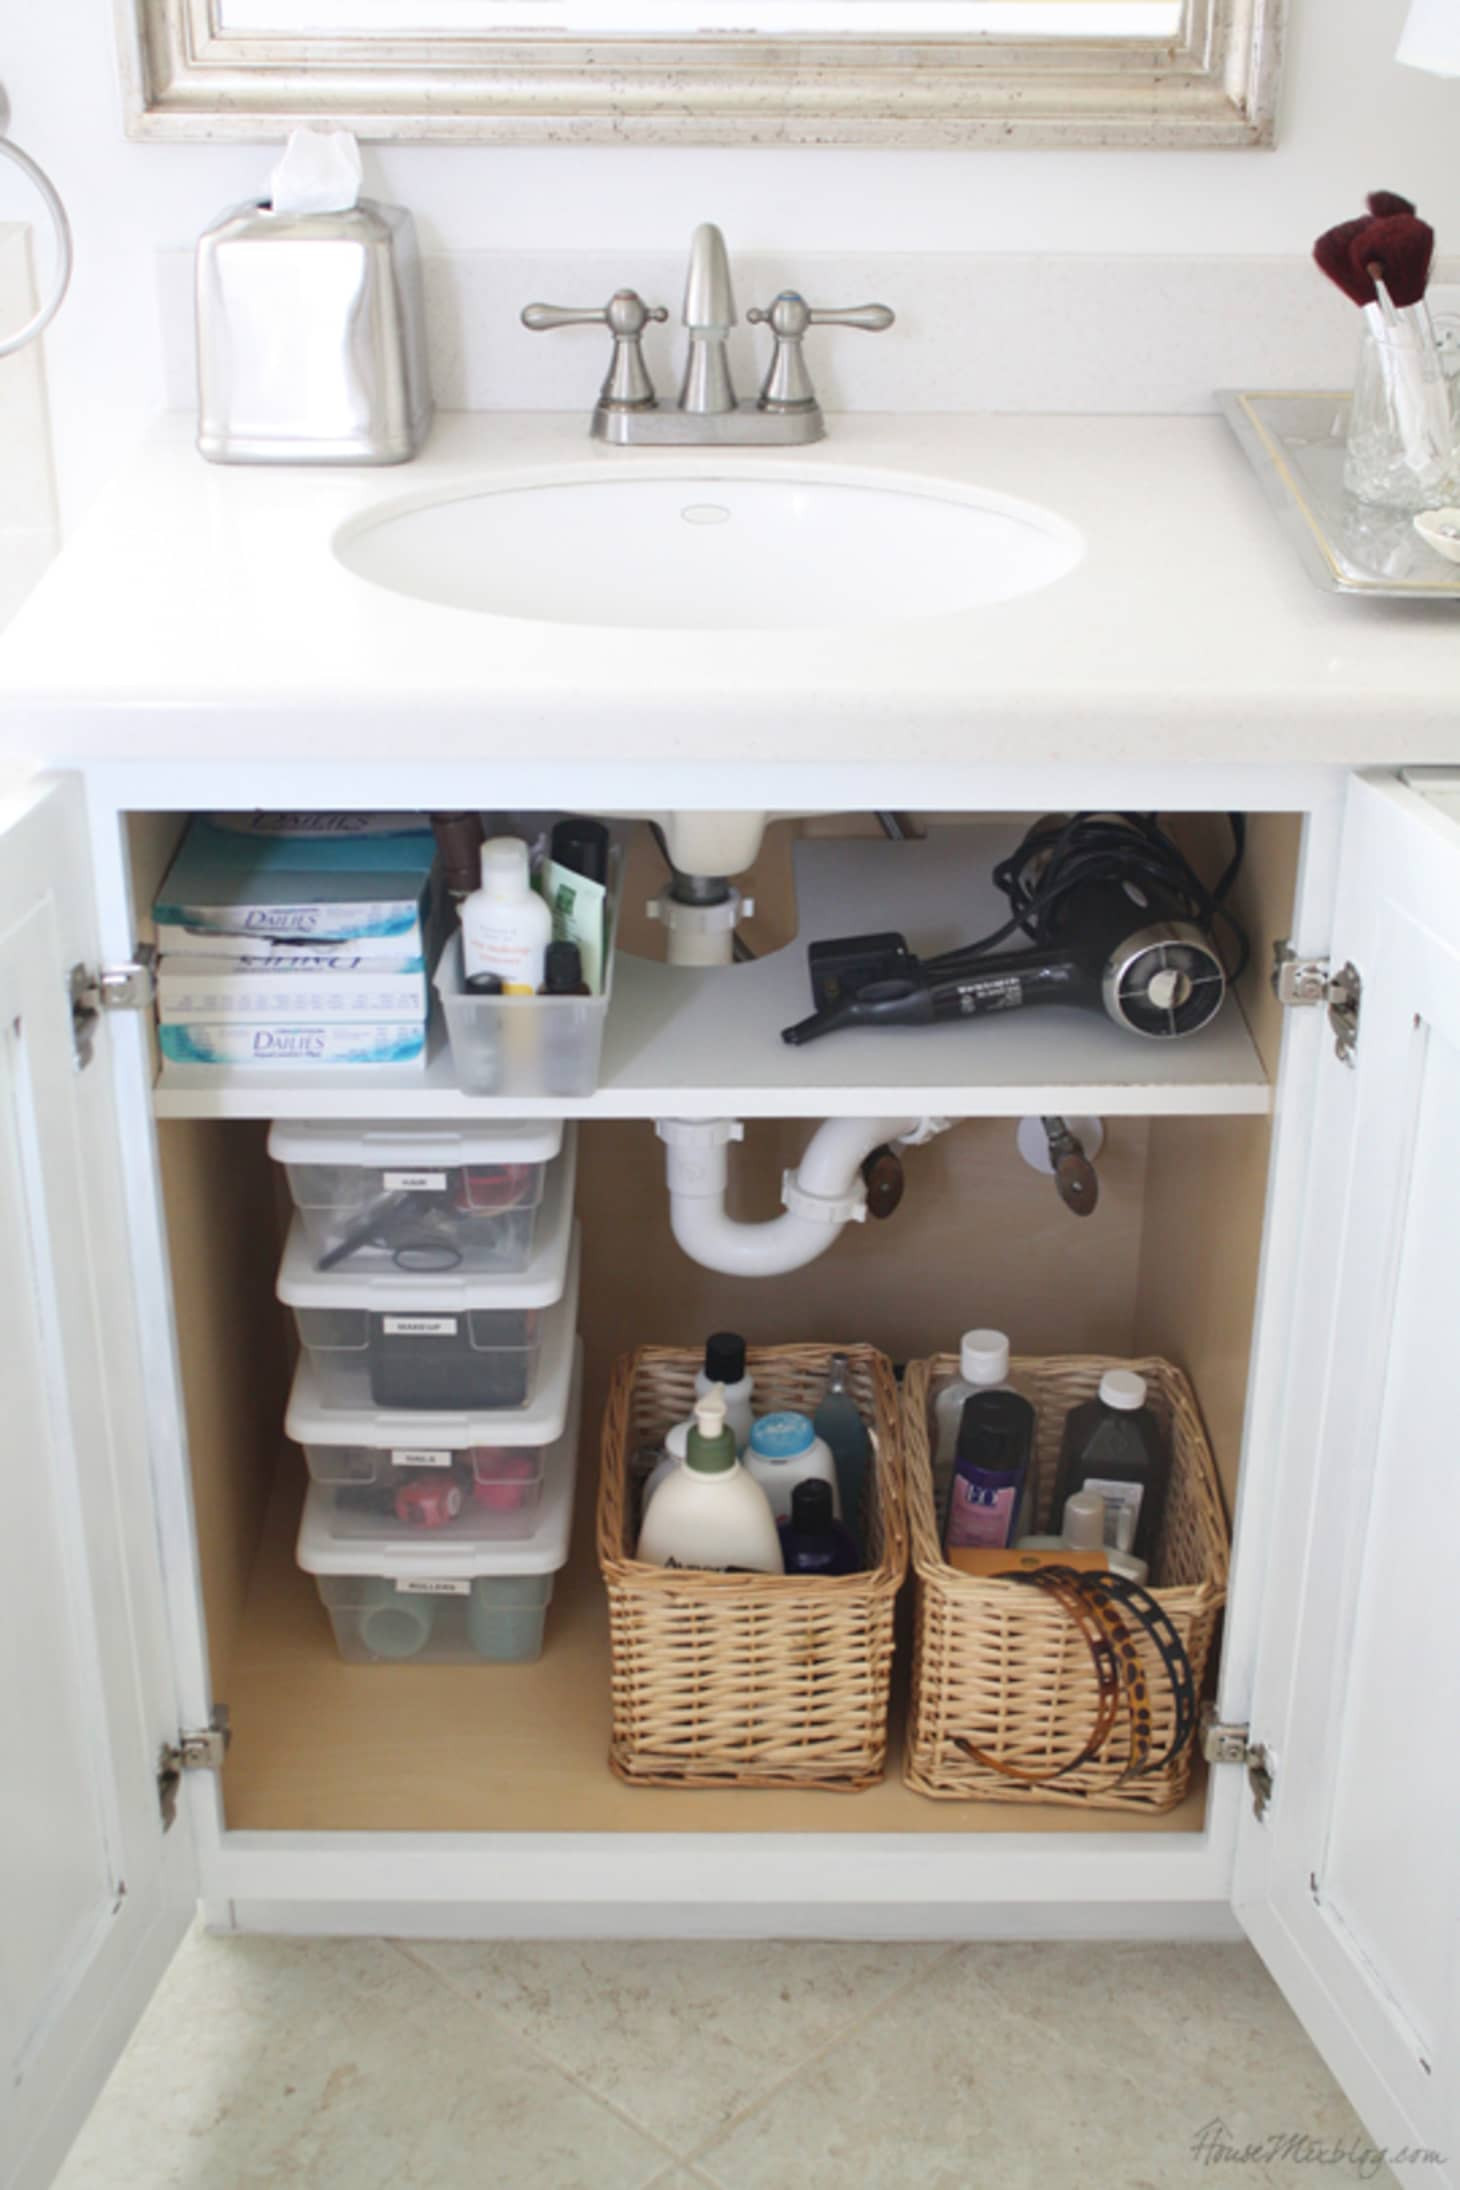 Small Bathroom Shelves
 6 Places to Add Shelving for More Storage in a Small